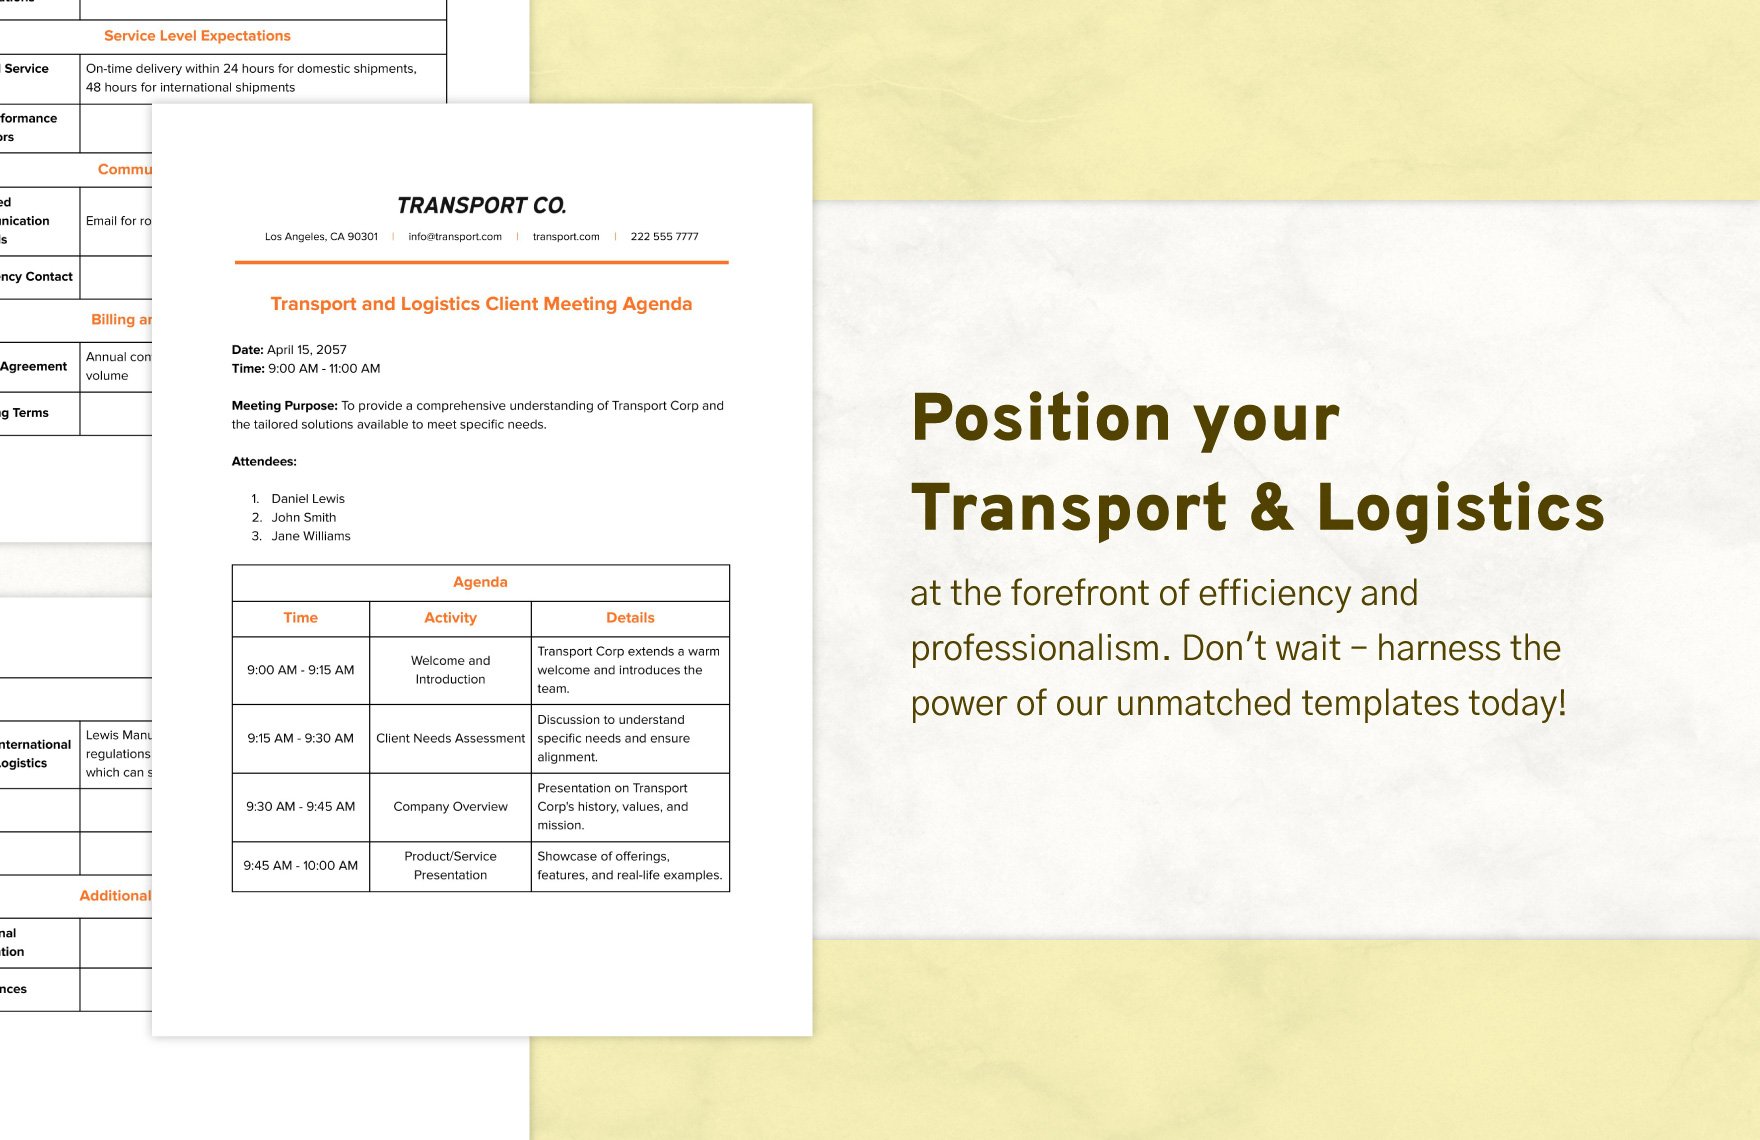 Transport and Logistics Client Profile Template